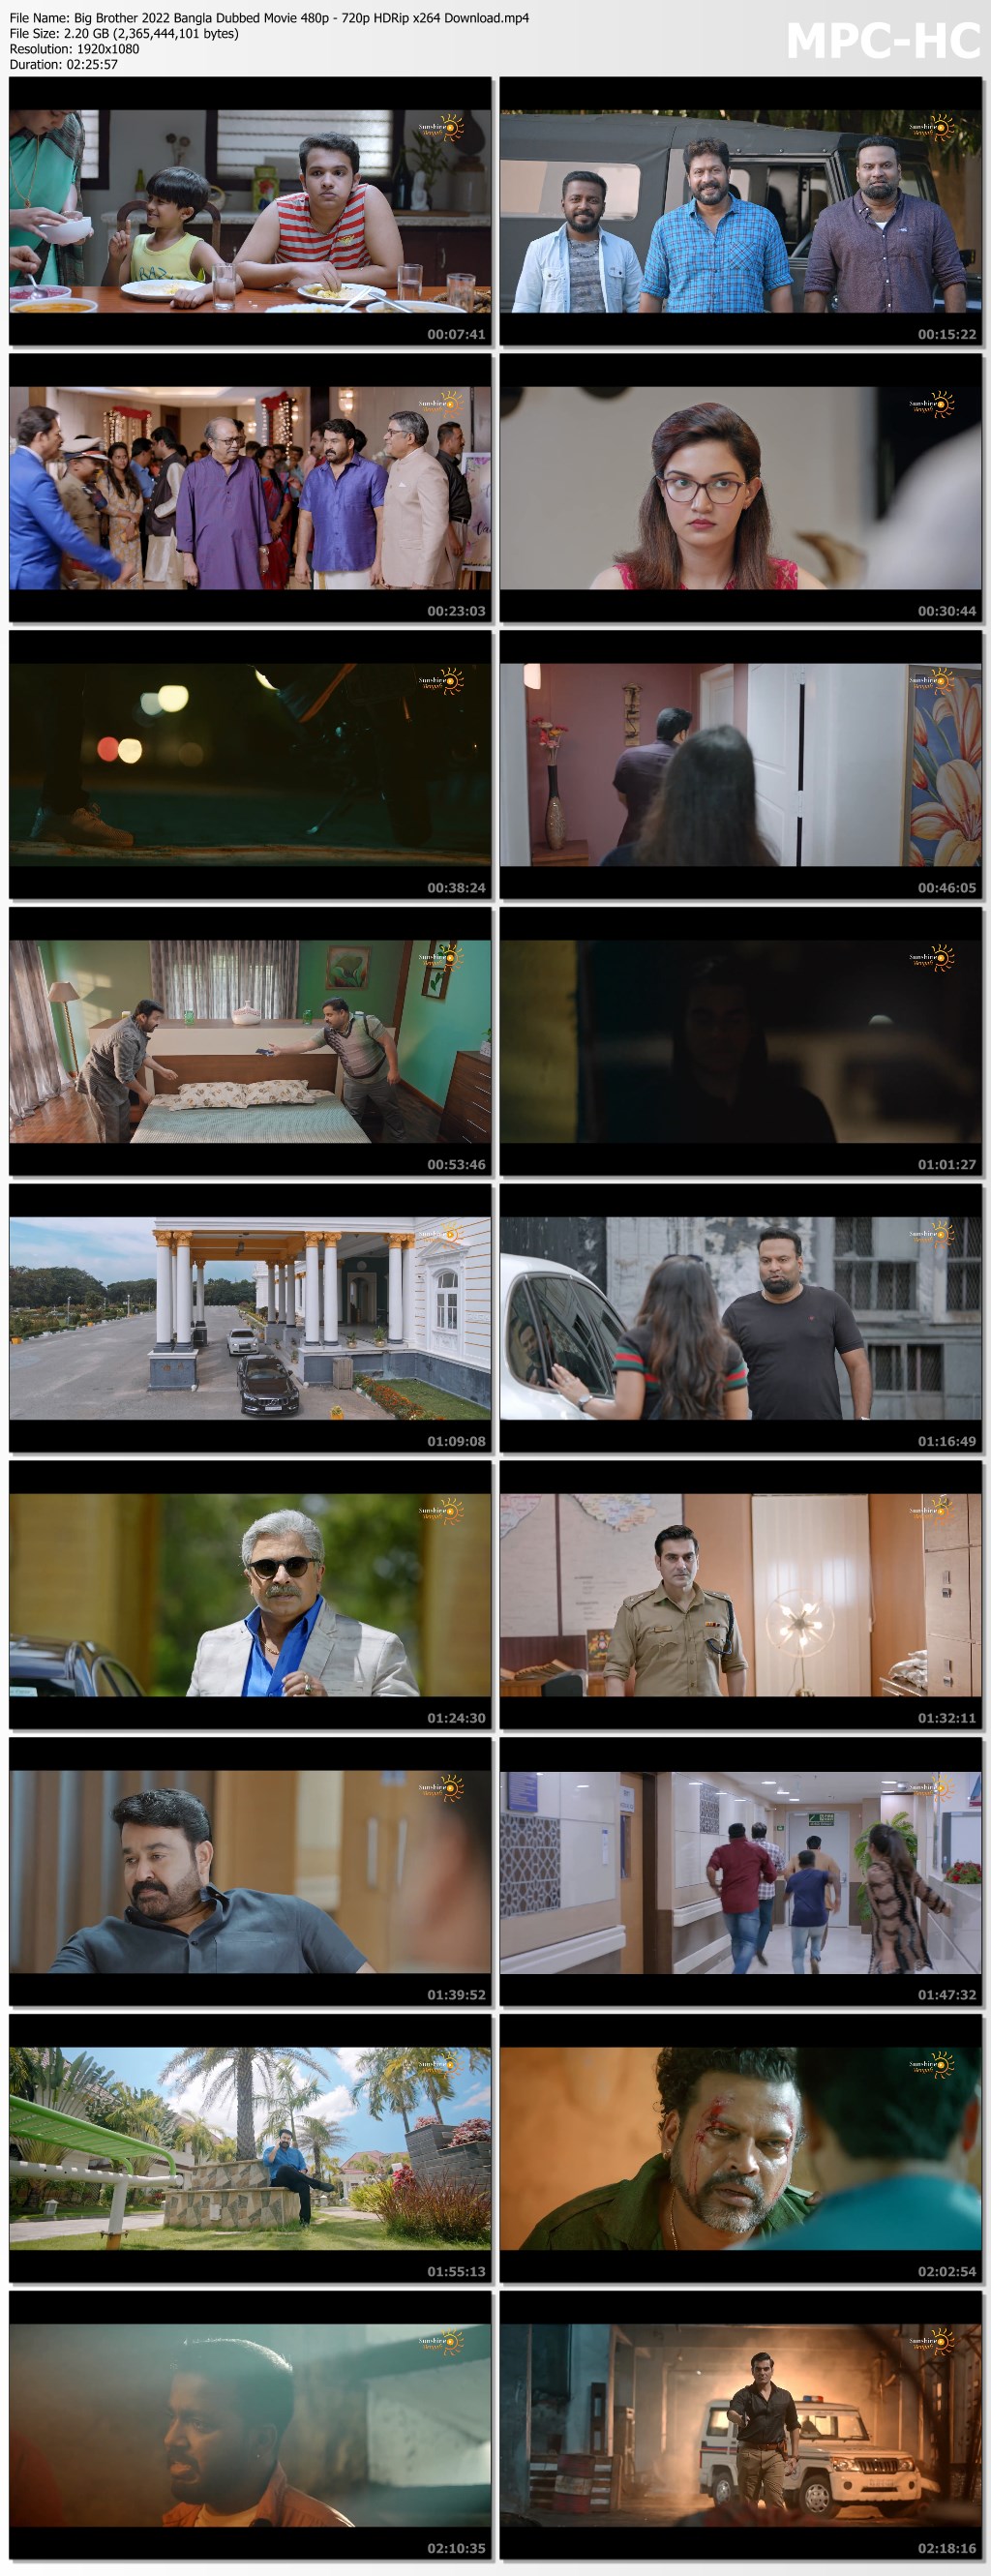 Big Brother 2022 Bangla Dubbed Movie 480p 720p HDRip x264 Download.mp4 thumbs